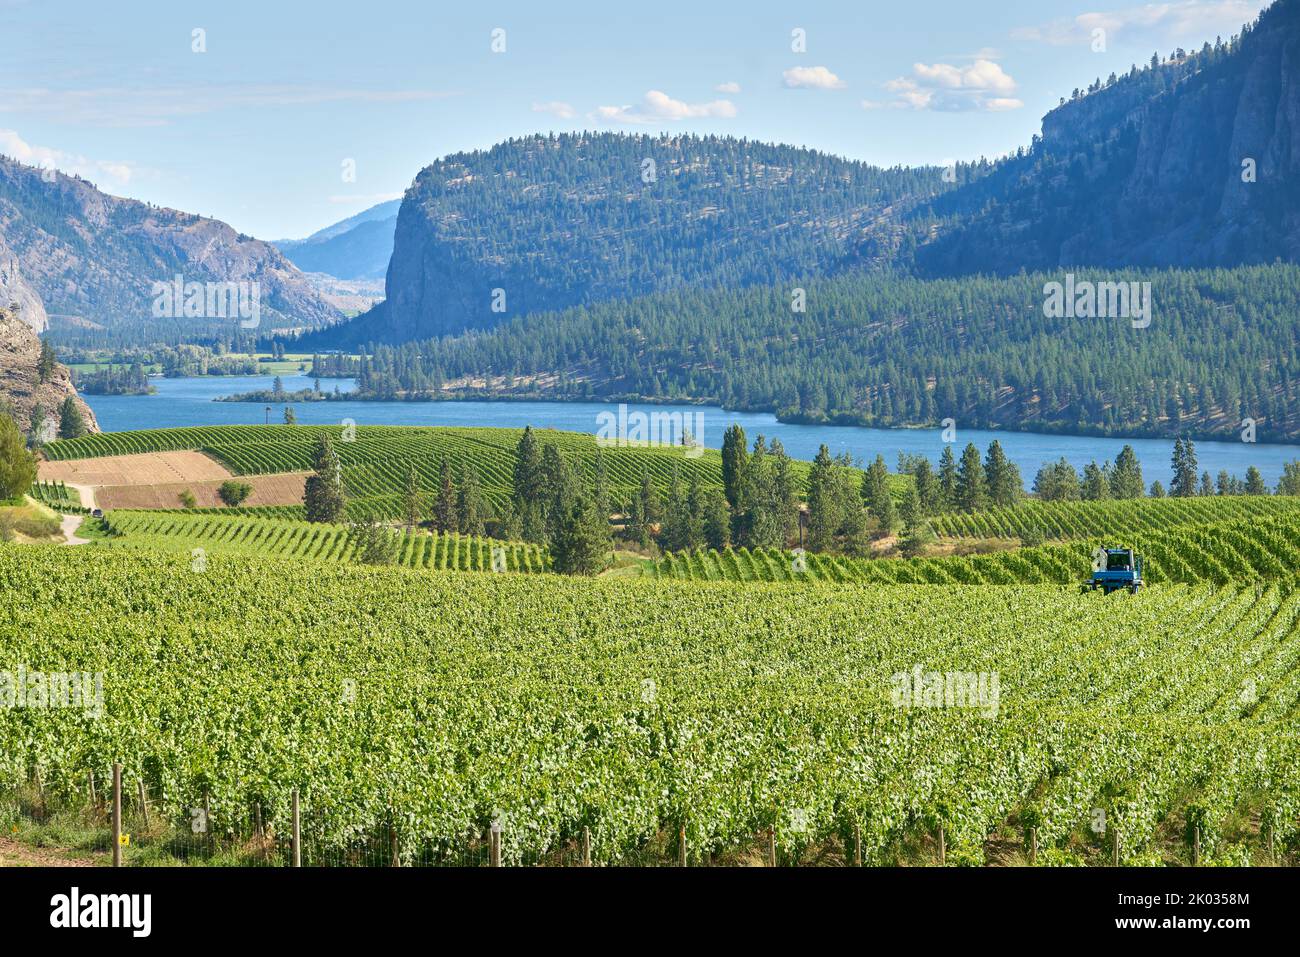 Straddle Tractor working in a Vineyard. A high clearance tractor working in a vineyard in the Okanagan Valley, British Columbia, Canada. Stock Photo